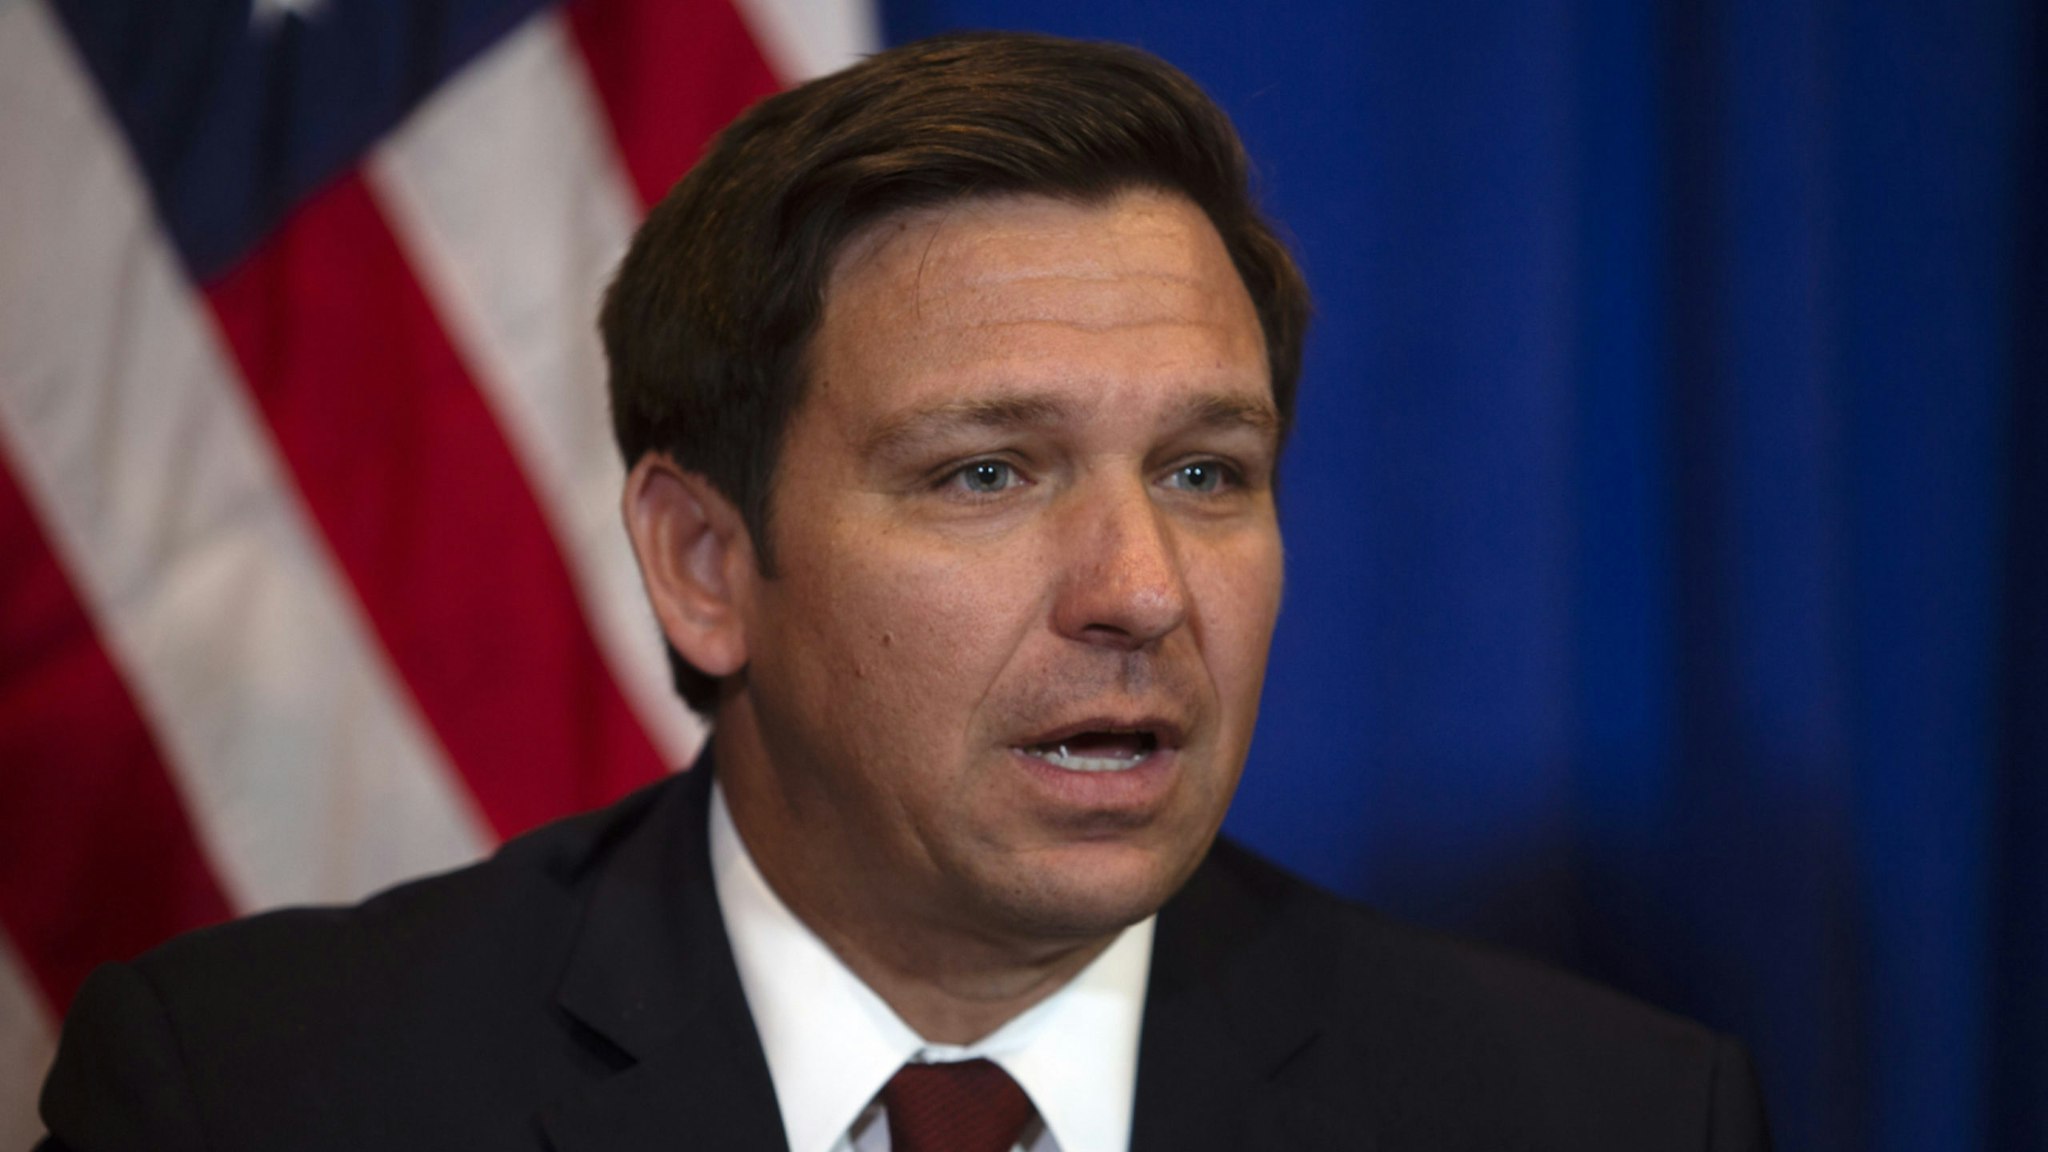 Ron DeSantis, governor of Florida, speaks during a news conference with U.S. Vice President Mike Pence, not pictured, in West Palm Beach, Florida, U.S., on Friday, Feb. 28, 2020.